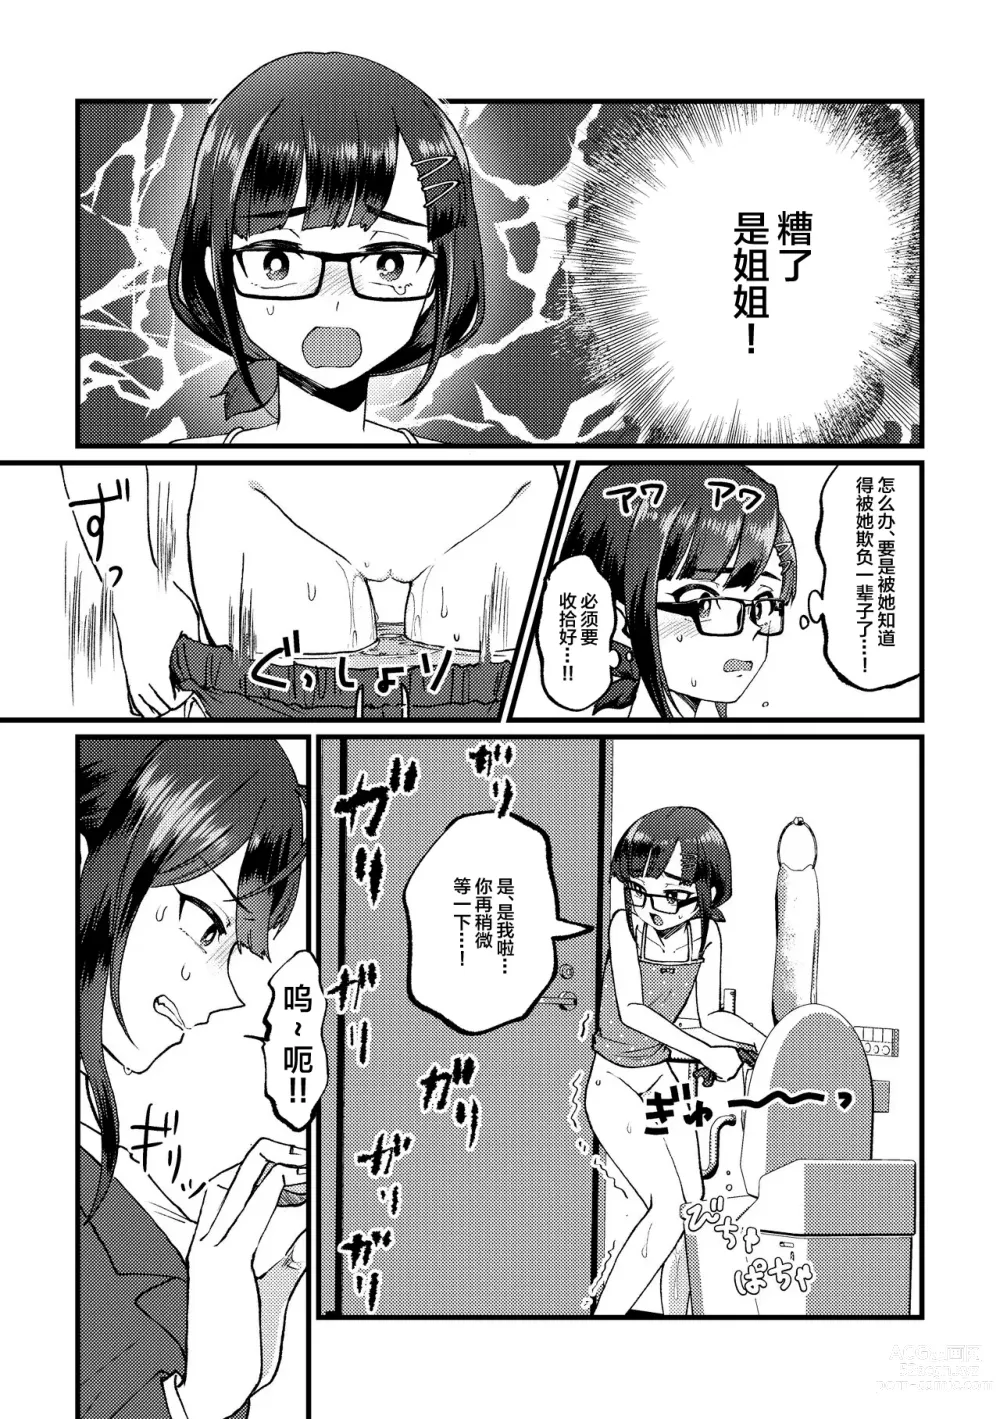 Page 9 of doujinshi 续GOGO!憋尿冲刺